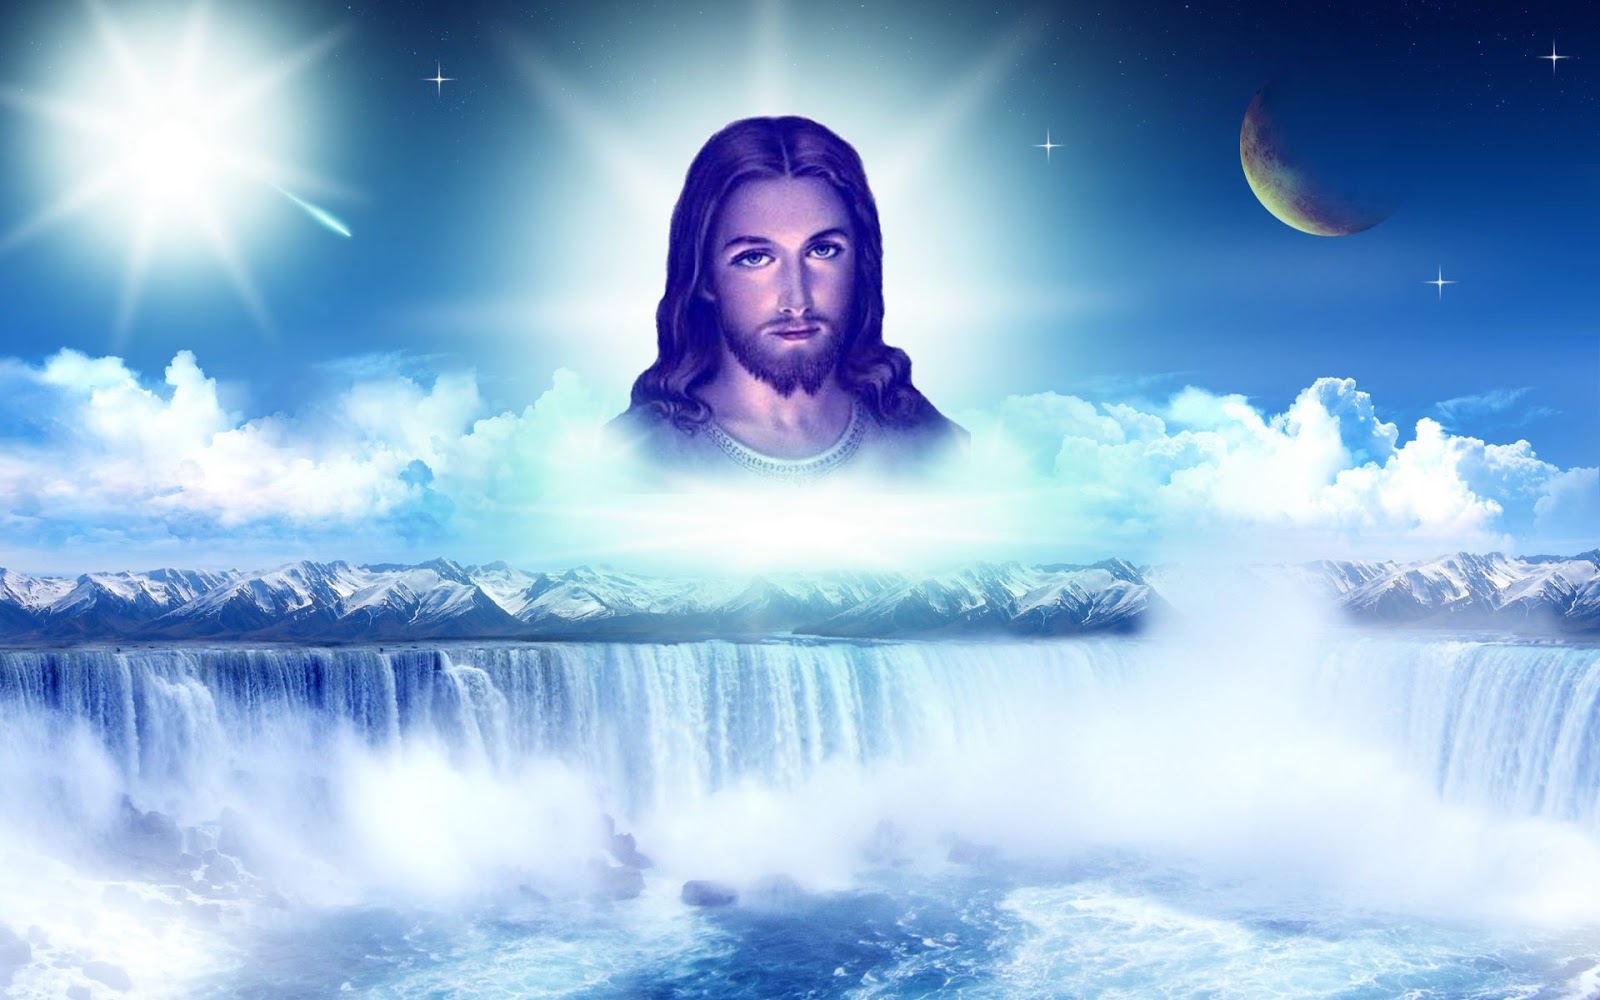 Stunning Collection of 999+ Jesus Christ Images in Full 4K